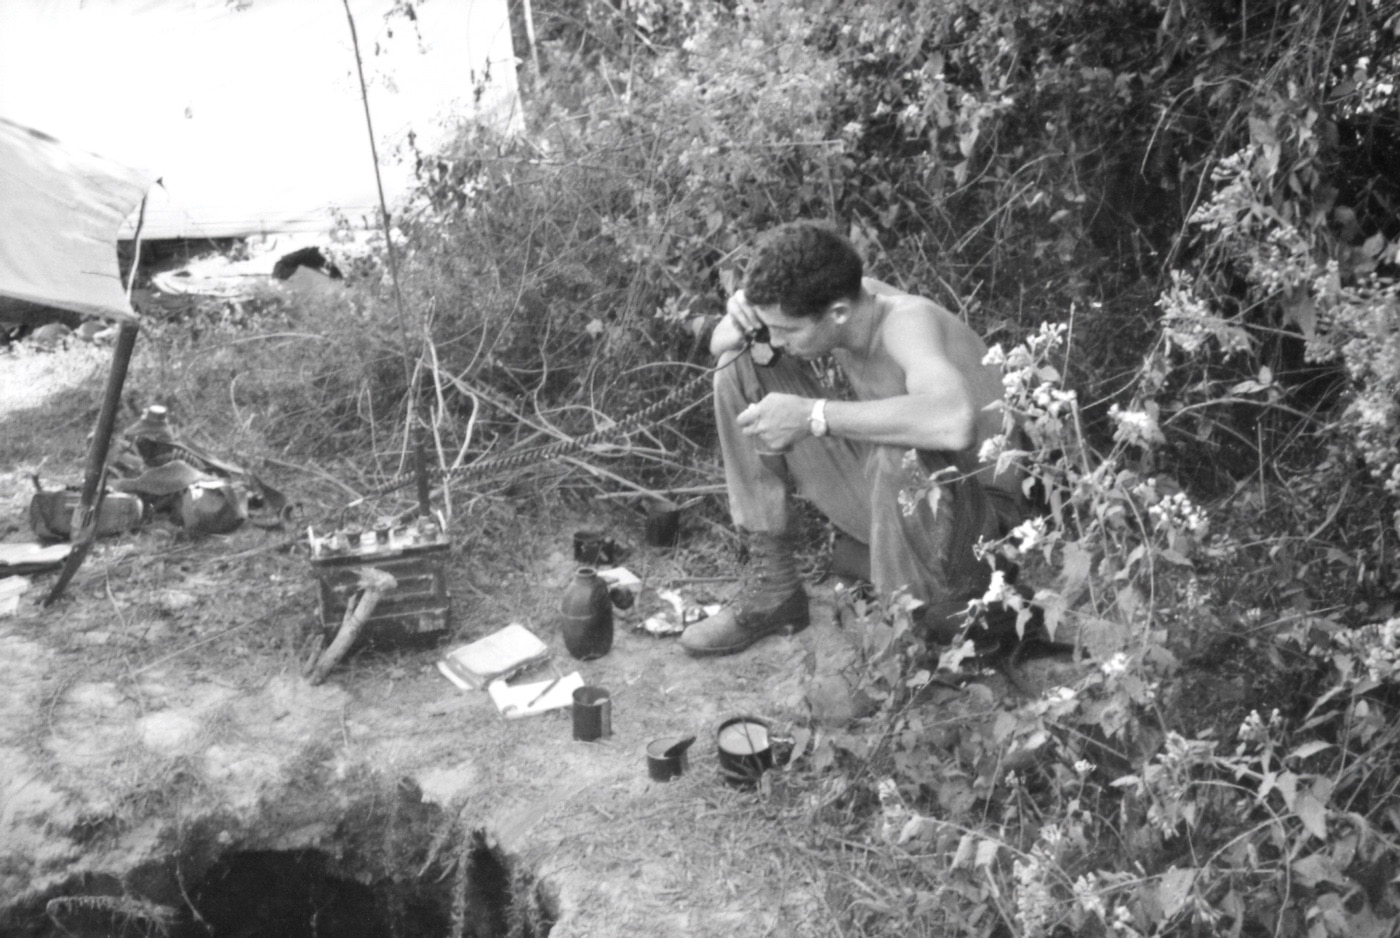 Although their numbers were limited, Kiwi combat troops were involved in the Vietnam War. Shown here is a New Zealand artillery observed embedded with Australian infantry. His role was to call in fire support missions from his artillery unit. His presence proves this was more than just an American war in Vietnam. 